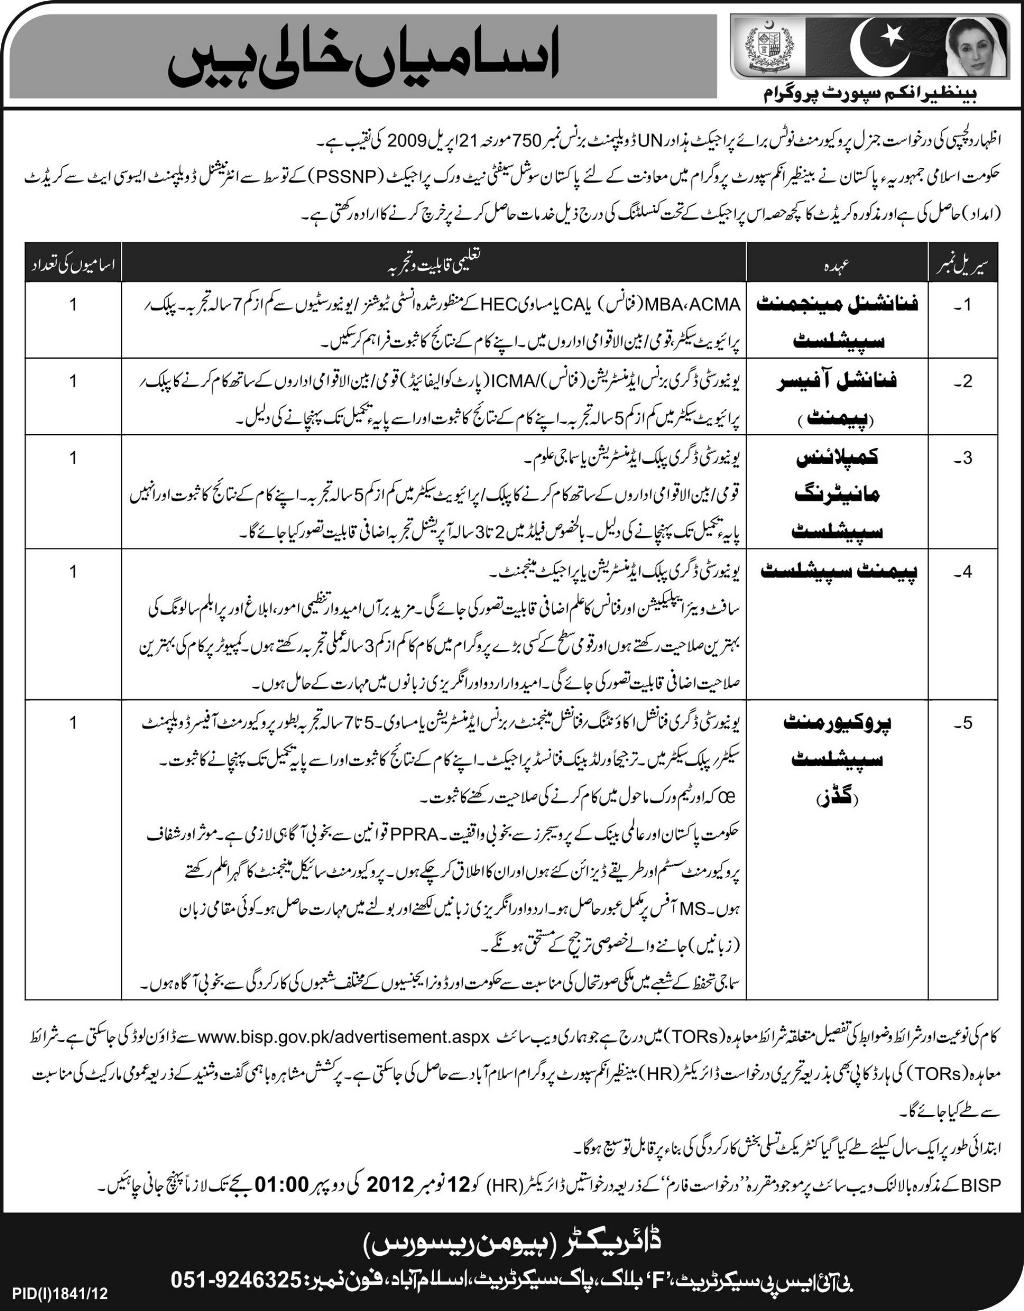 Professional Required in Banazir Income Support Programme